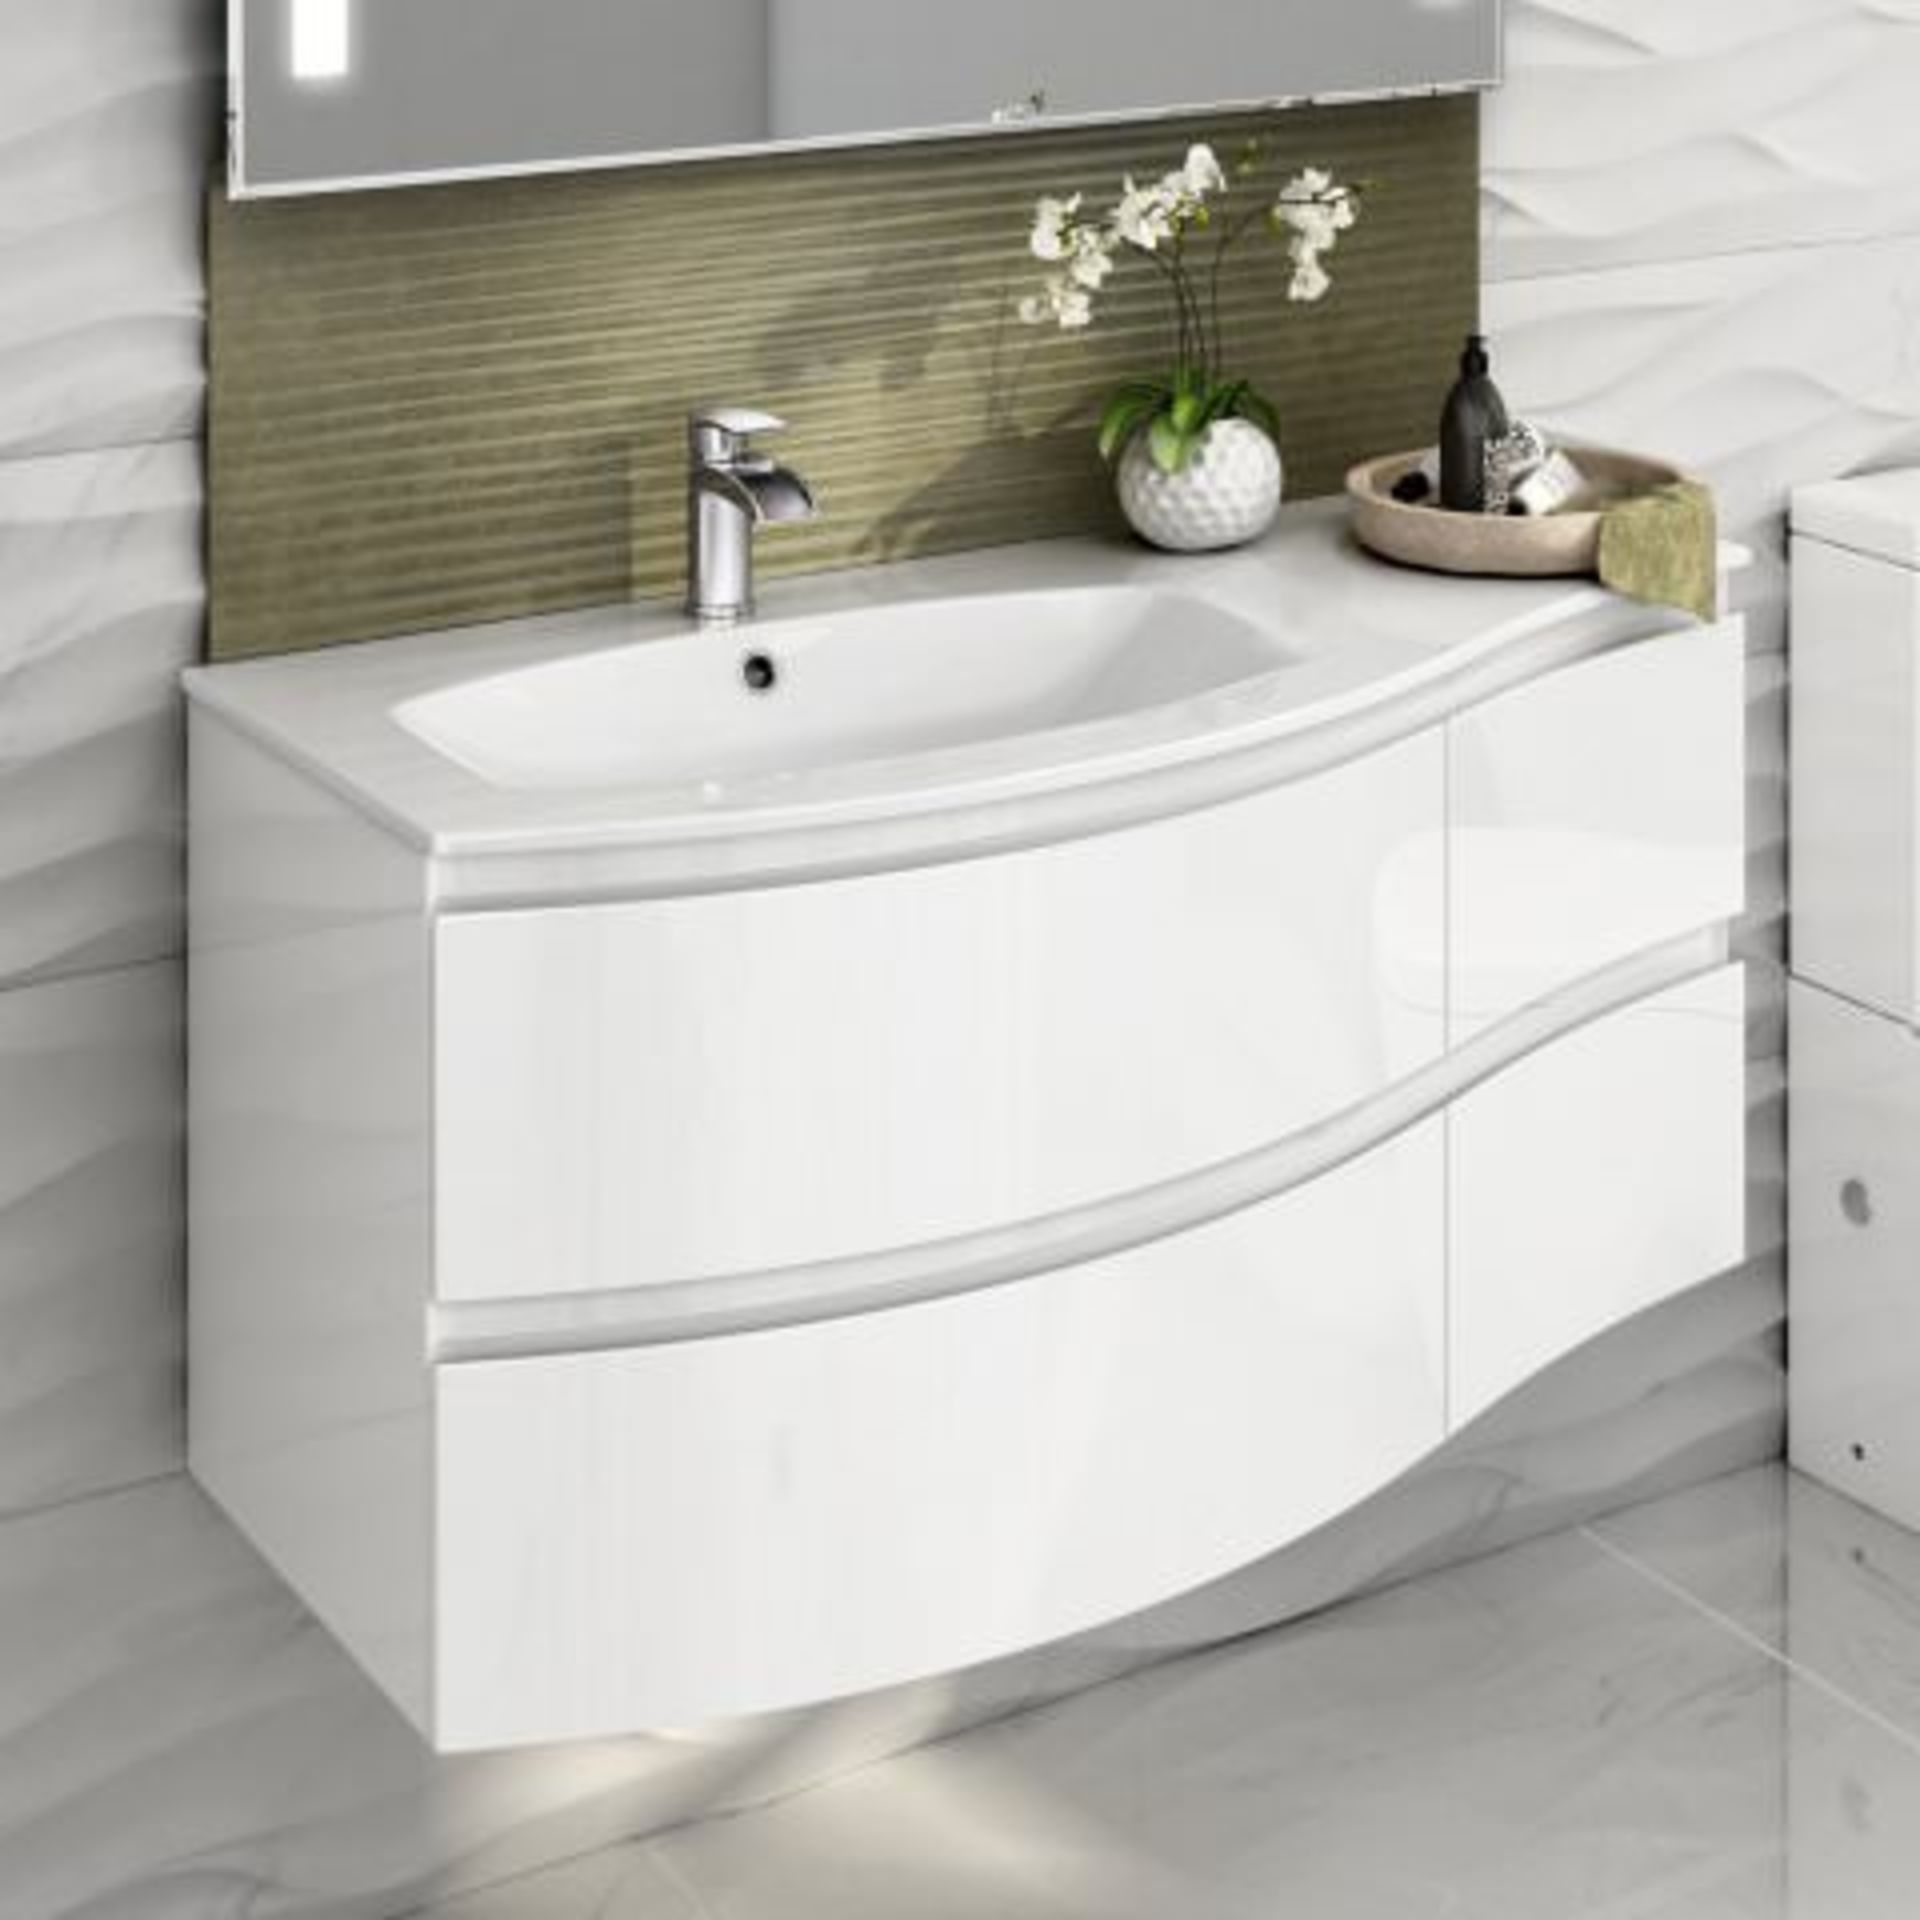 (W318) 1040mm Amelie High Gloss White Curved Vanity Unit - Left Hand - Wall Hung. RRP £1,249.